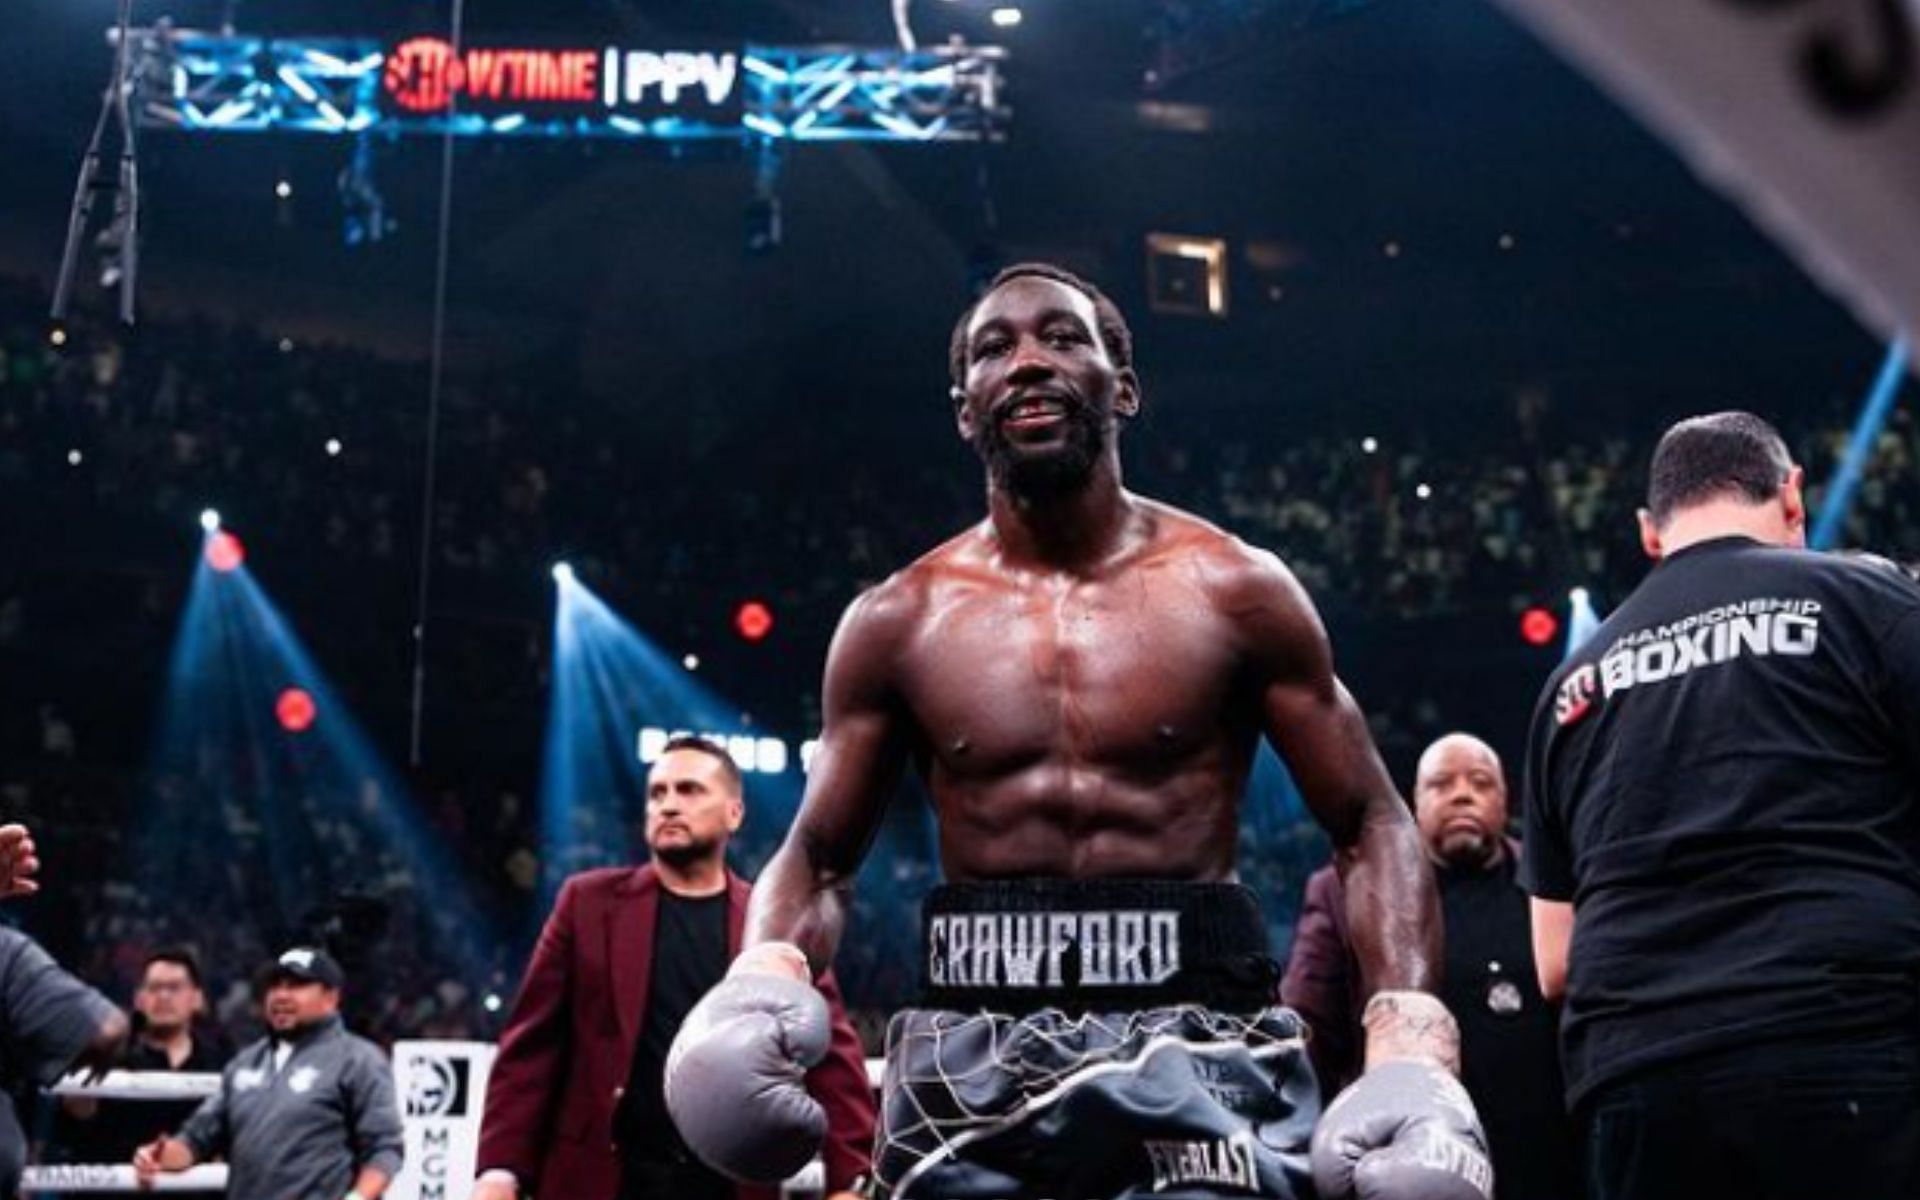 Terence Crawford is expected to face Canelo Alvarez in September. [Image via @Tbudcrawford on Instagram]